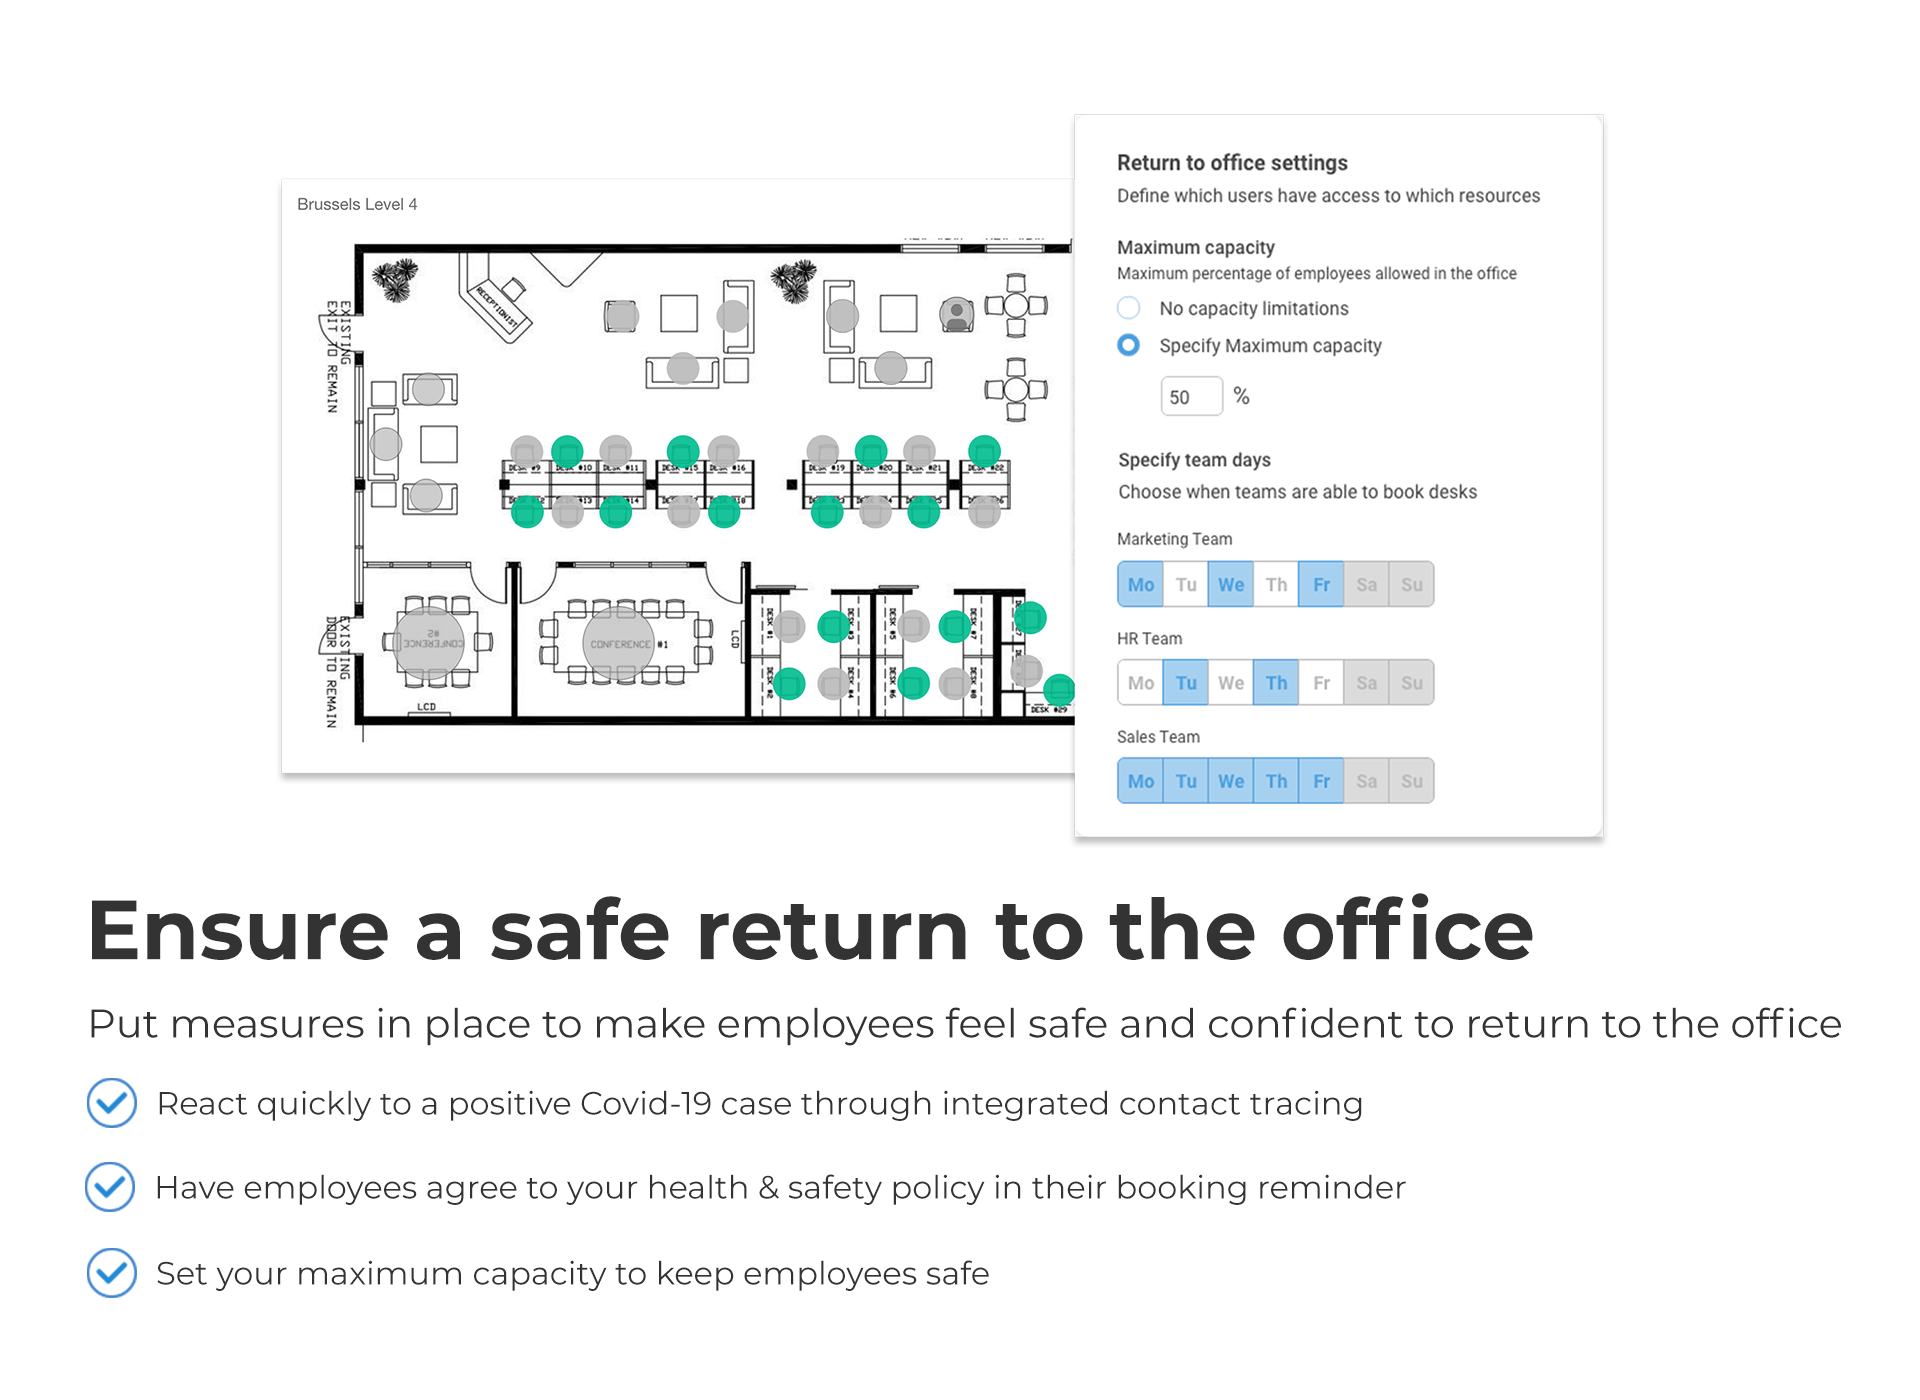 Tribeloo Software - Ensure a safe return to the office